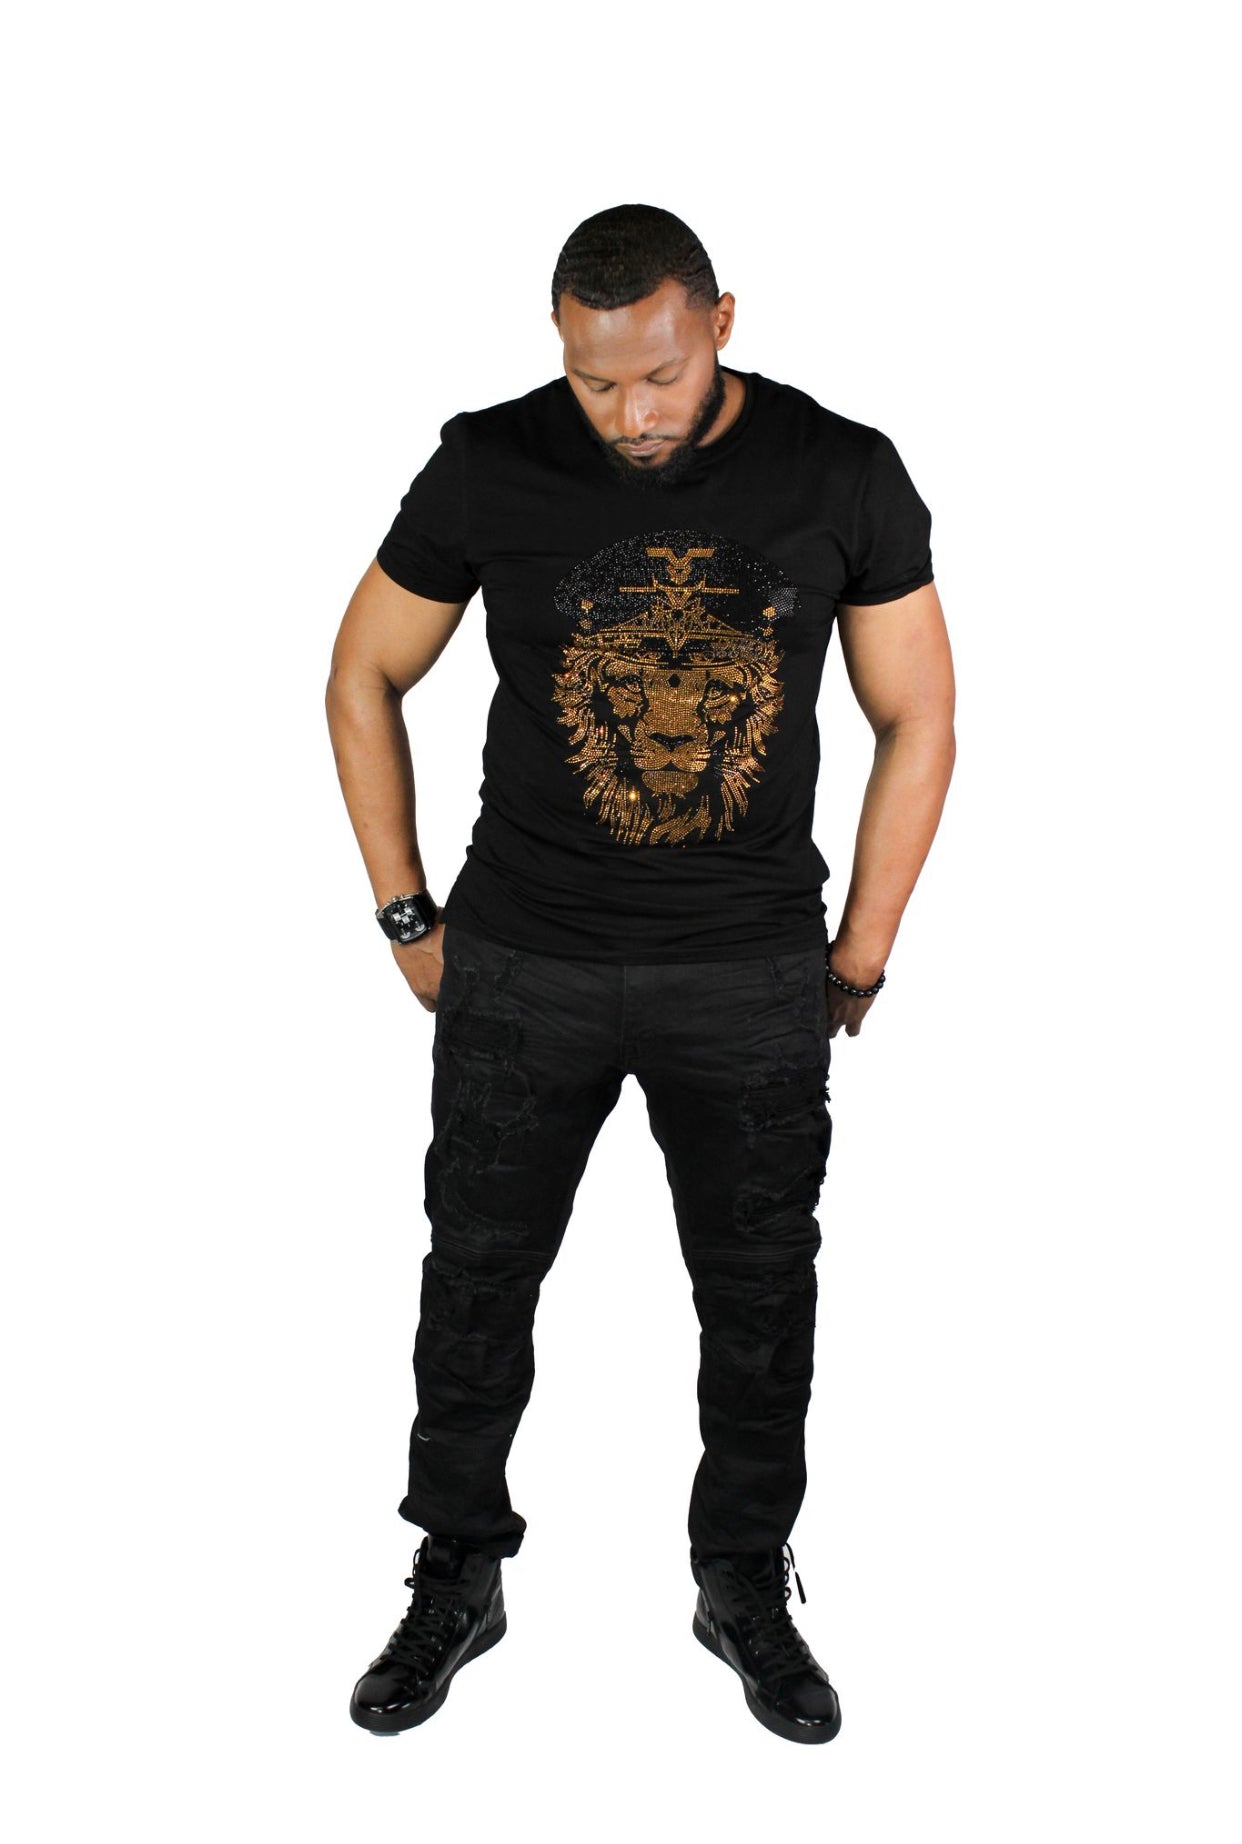 “The King is Here” Lion T-shirt